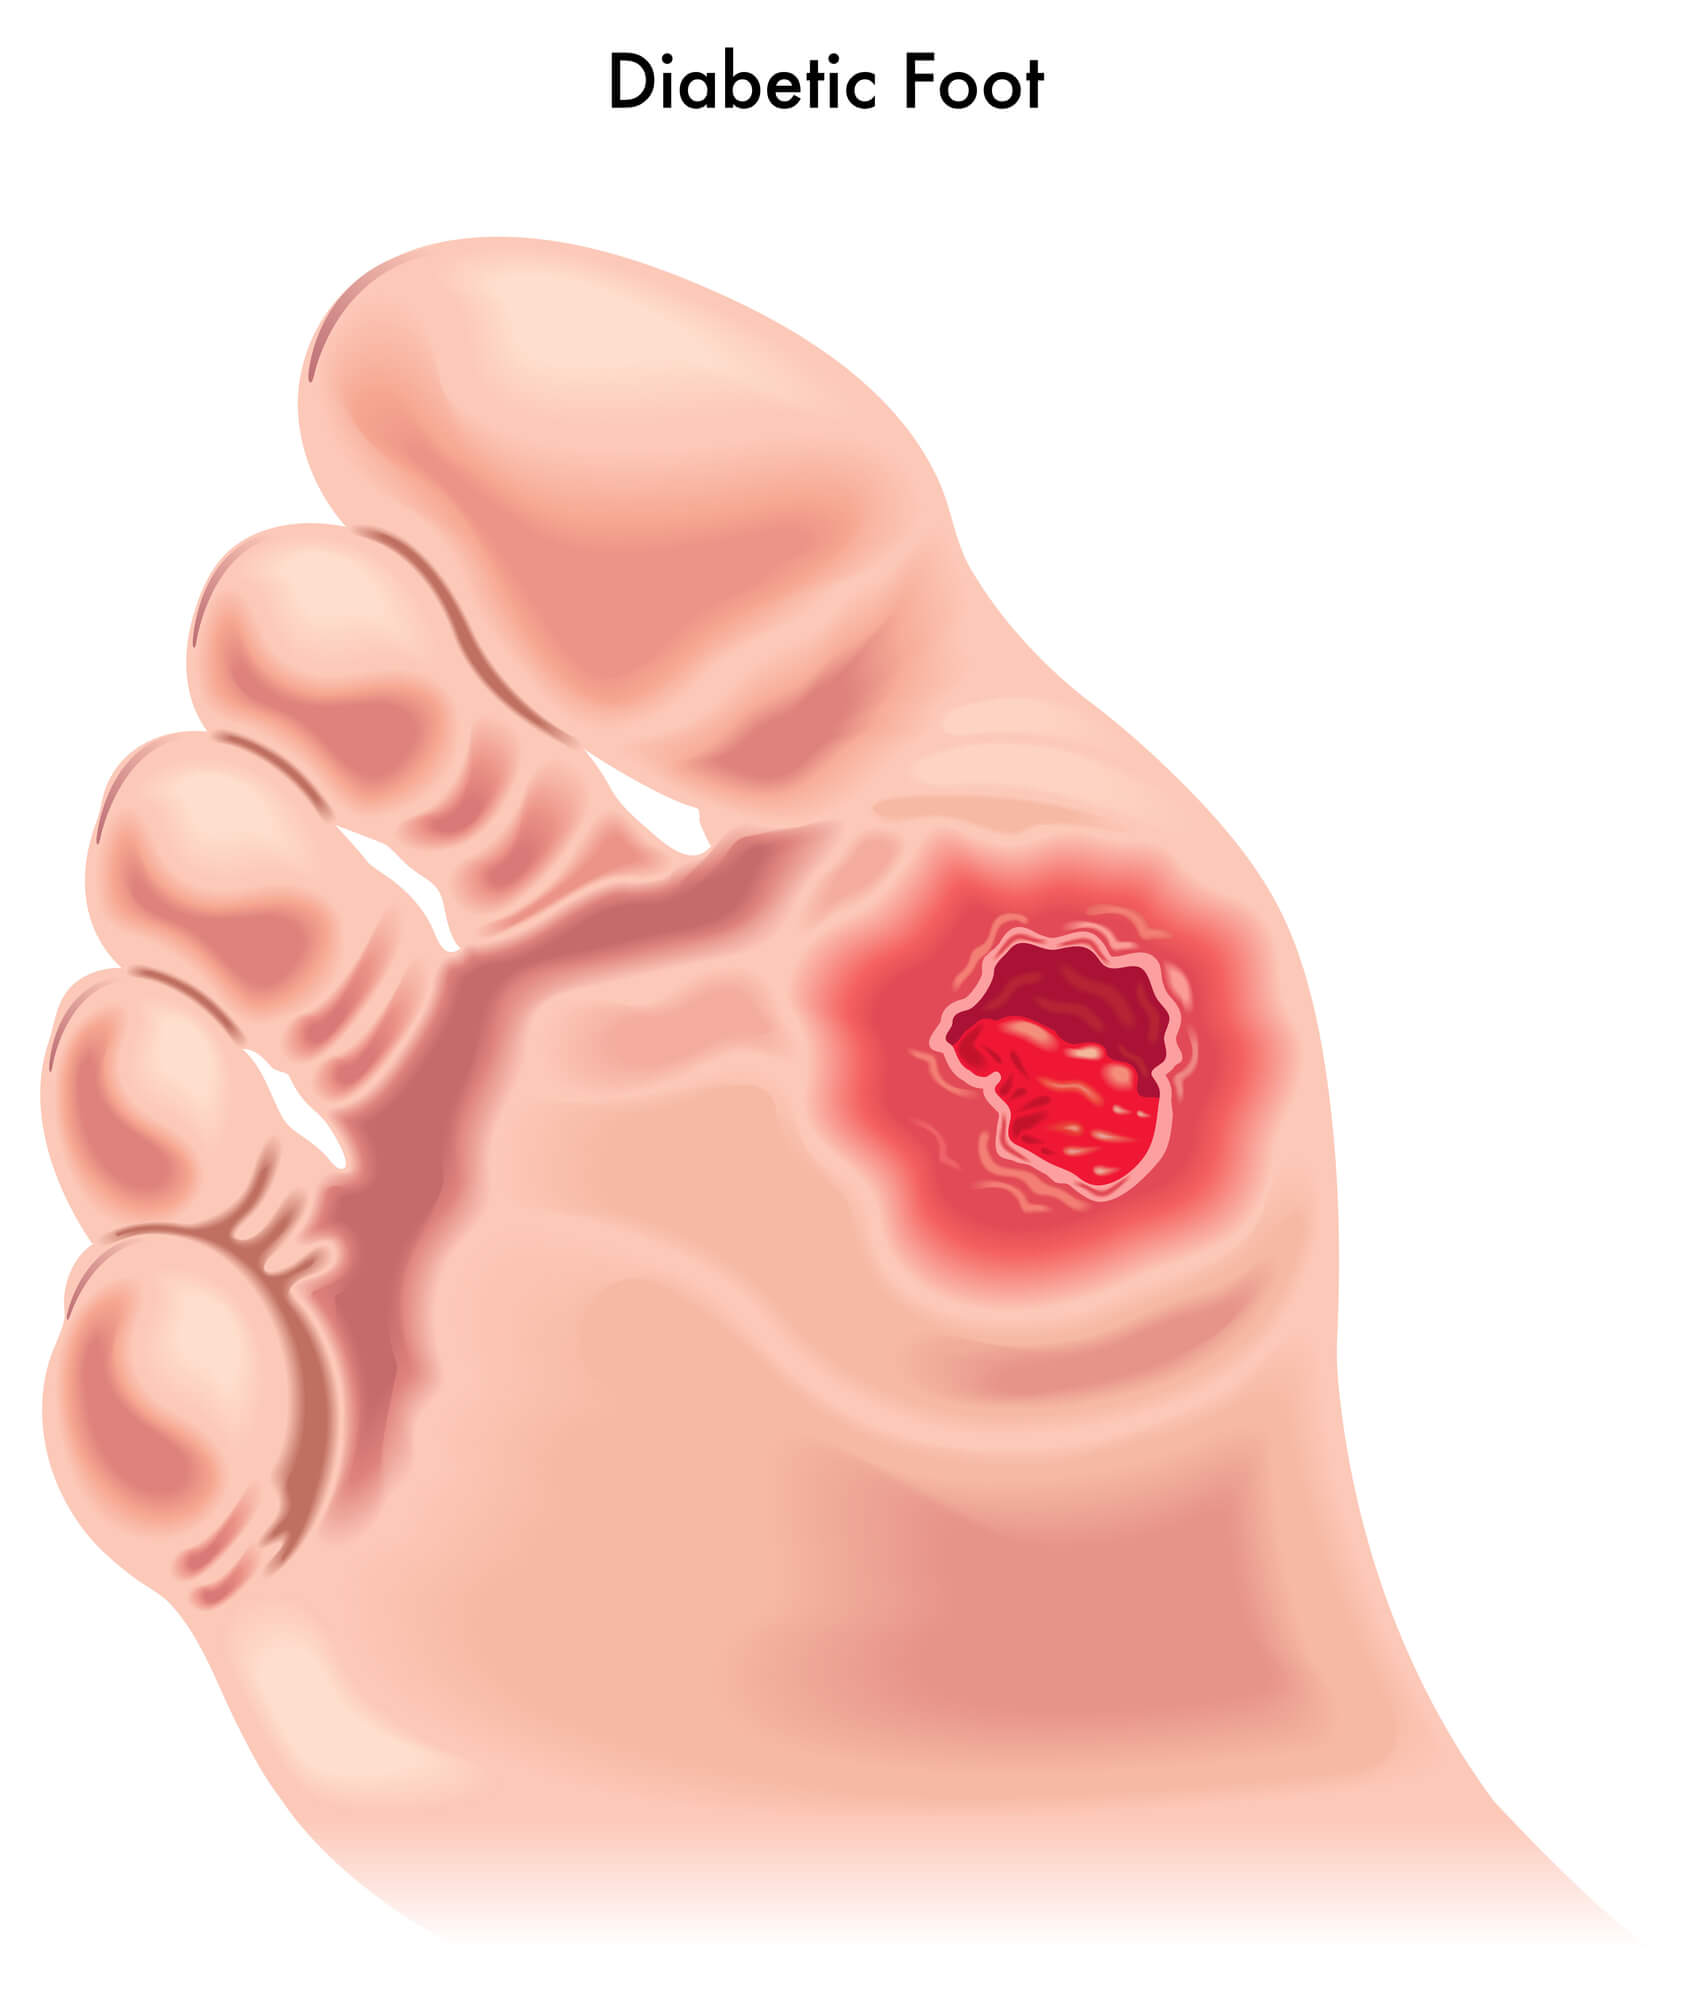 How to Prevent and Treat Diabetic Foot Ulcers - Glencoe Regional Health